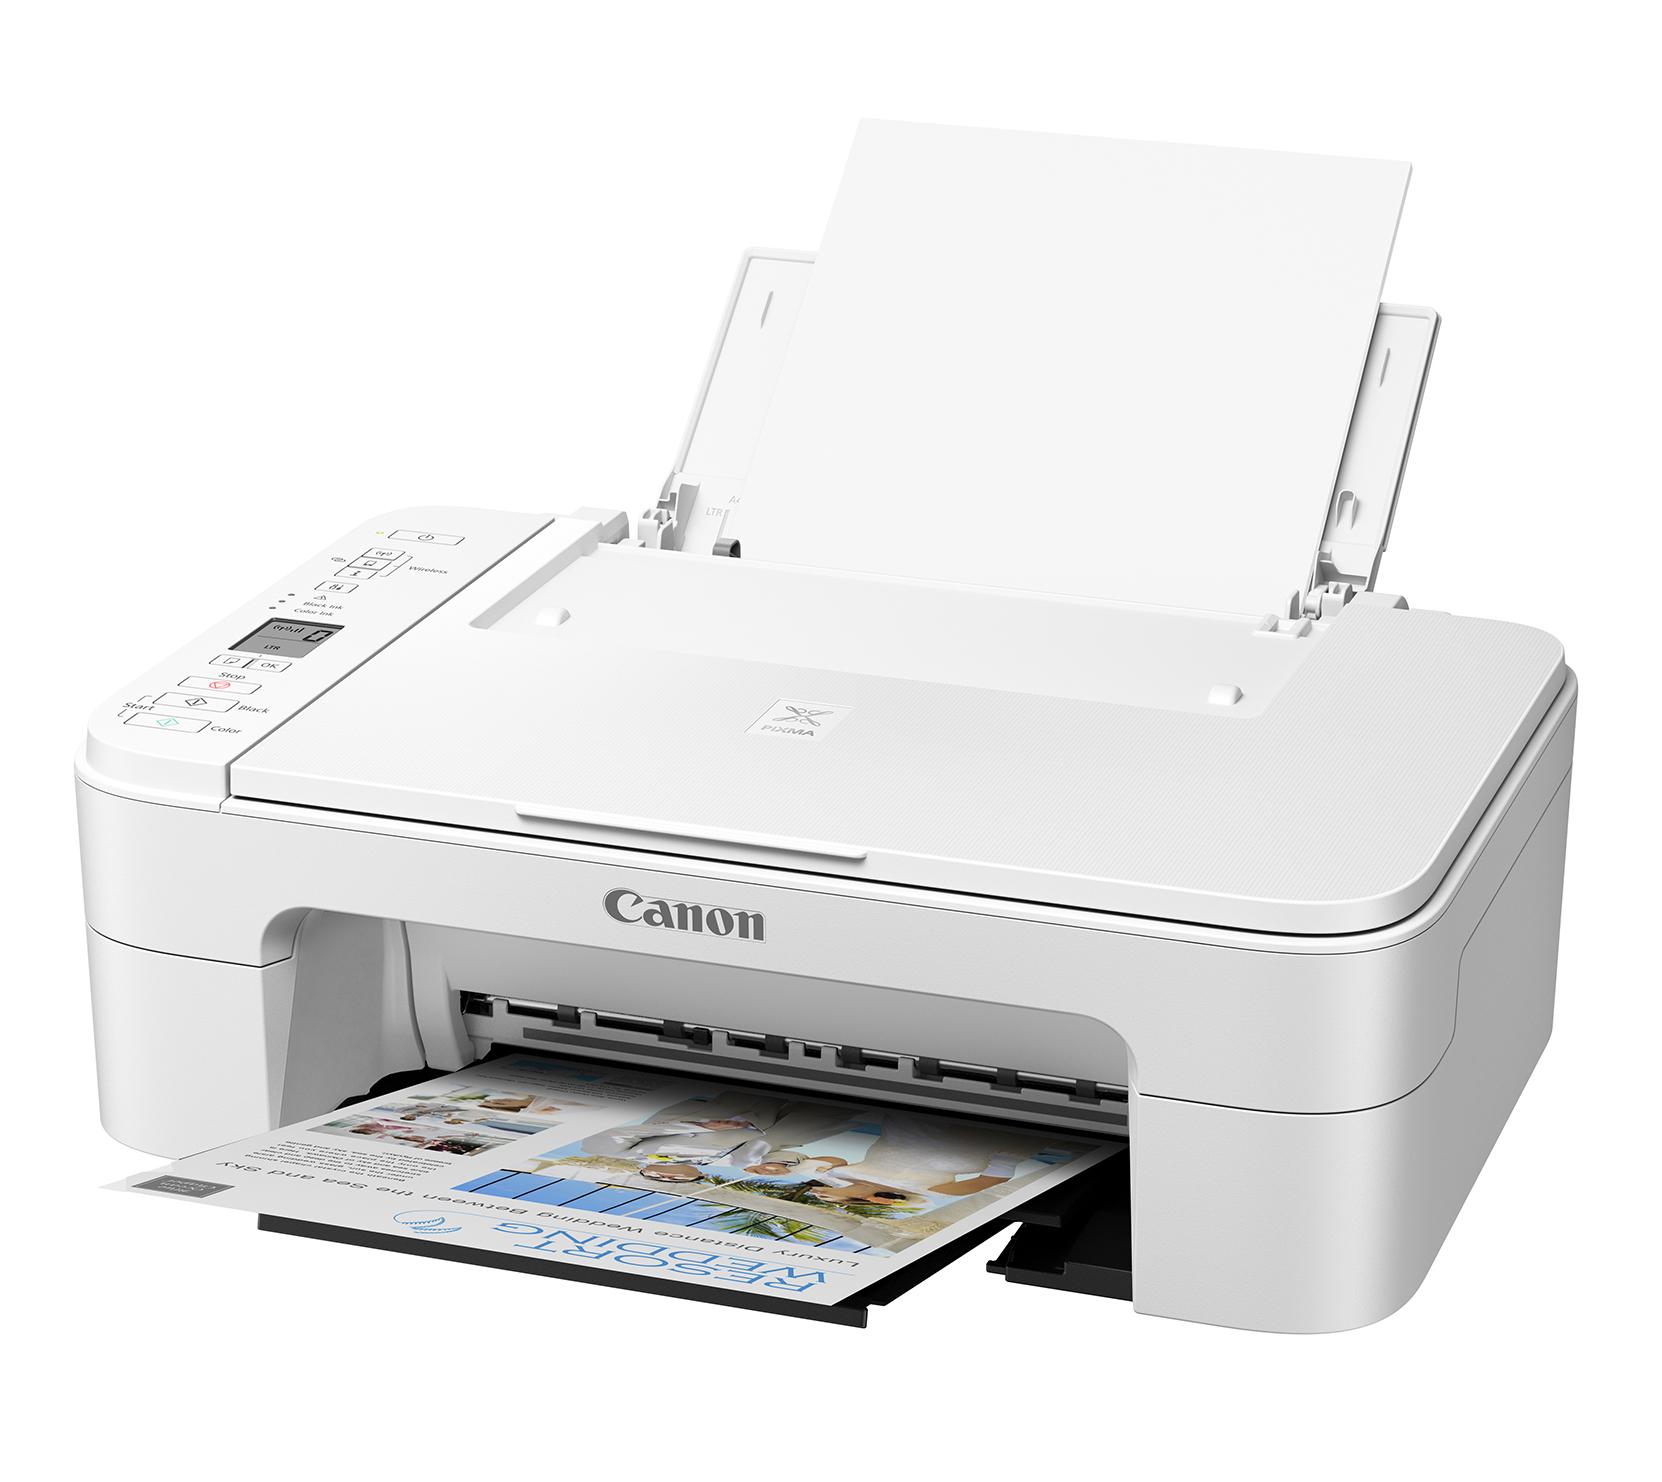 Canon Pixma TS3322 Wireless All-In-One Inkjet Printer for $19